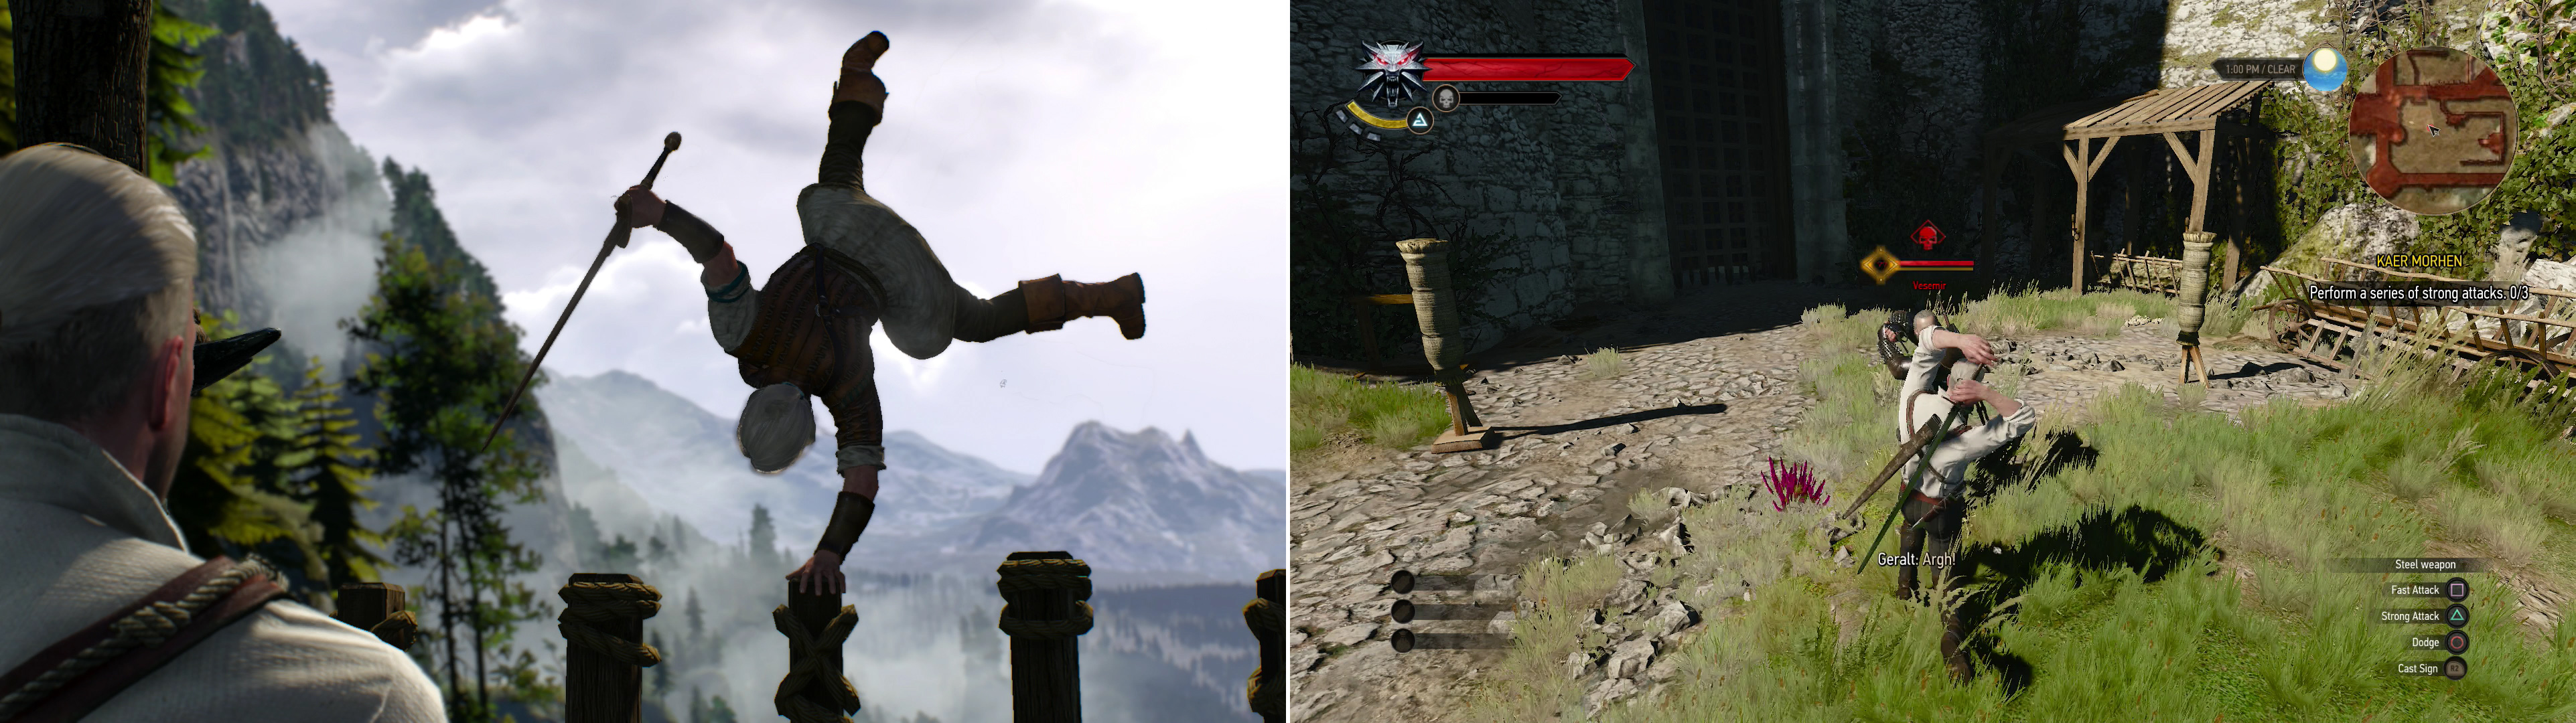 Geralt instructs Ciri as she trails (left), then spars with Vesemir to keep his own skills honed (right).